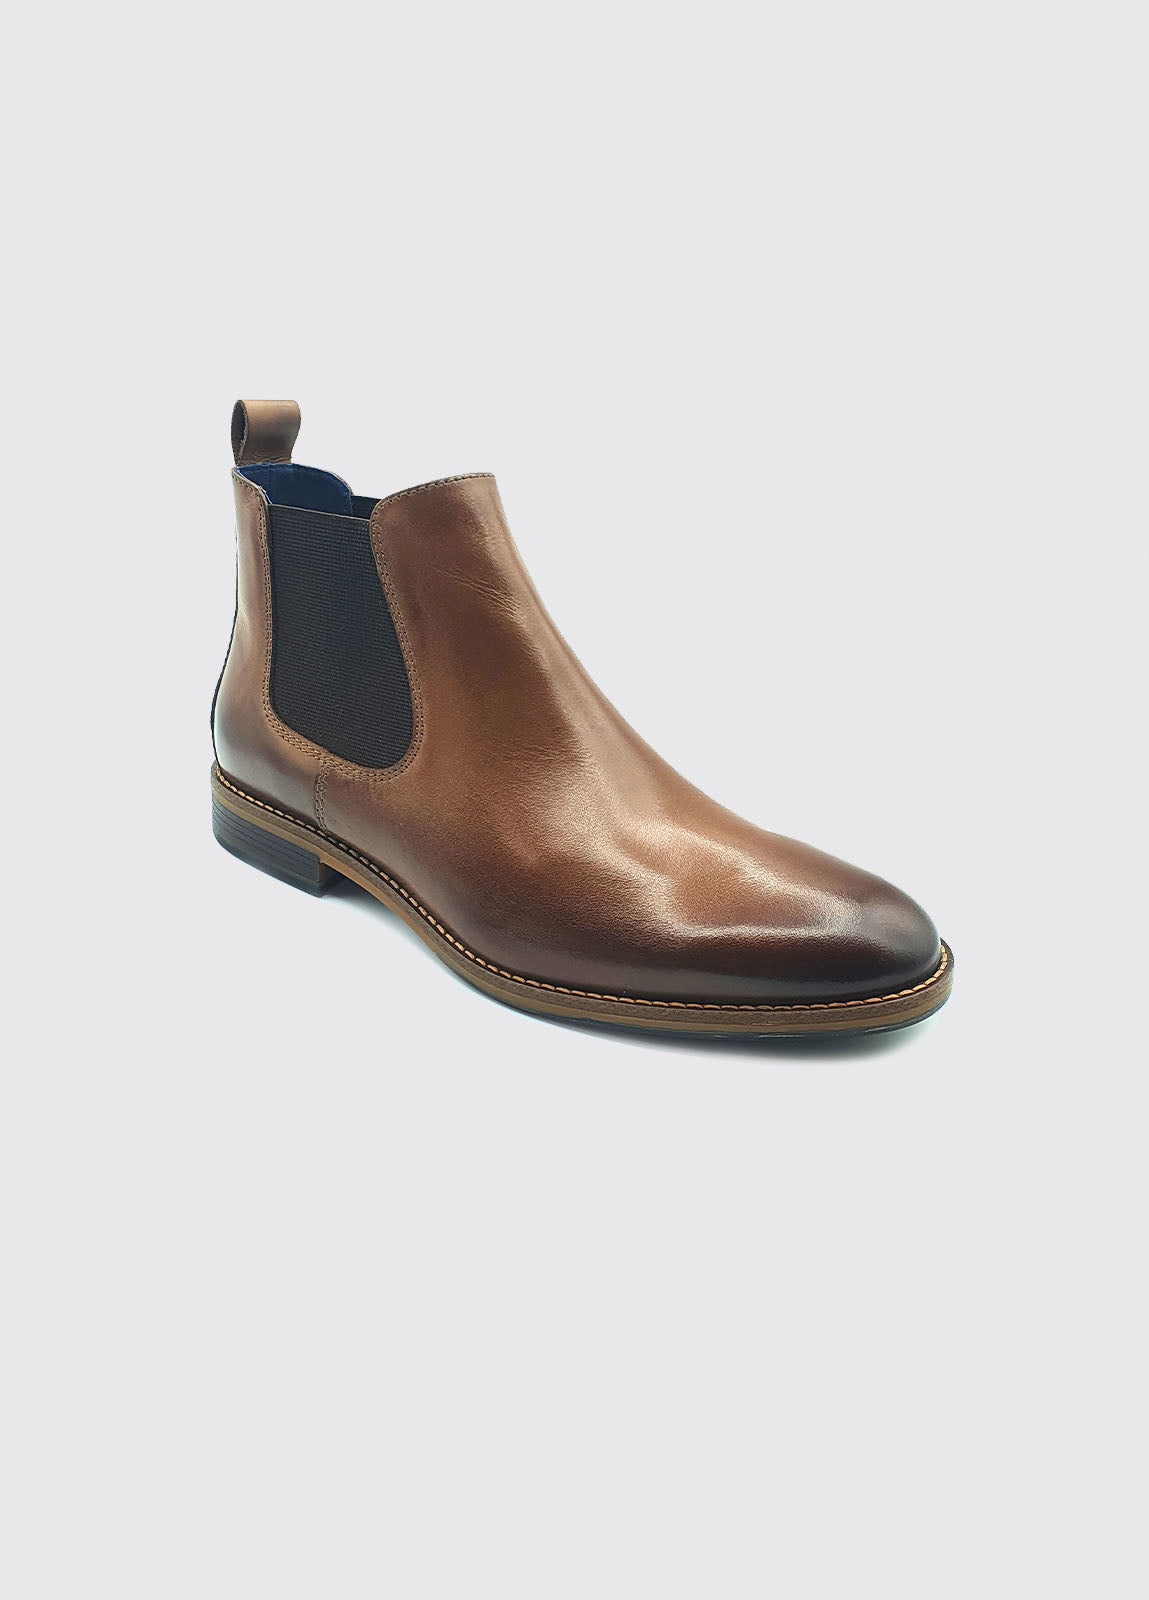 Men's Steed Slip on Tan Boot-Side View of One Boot